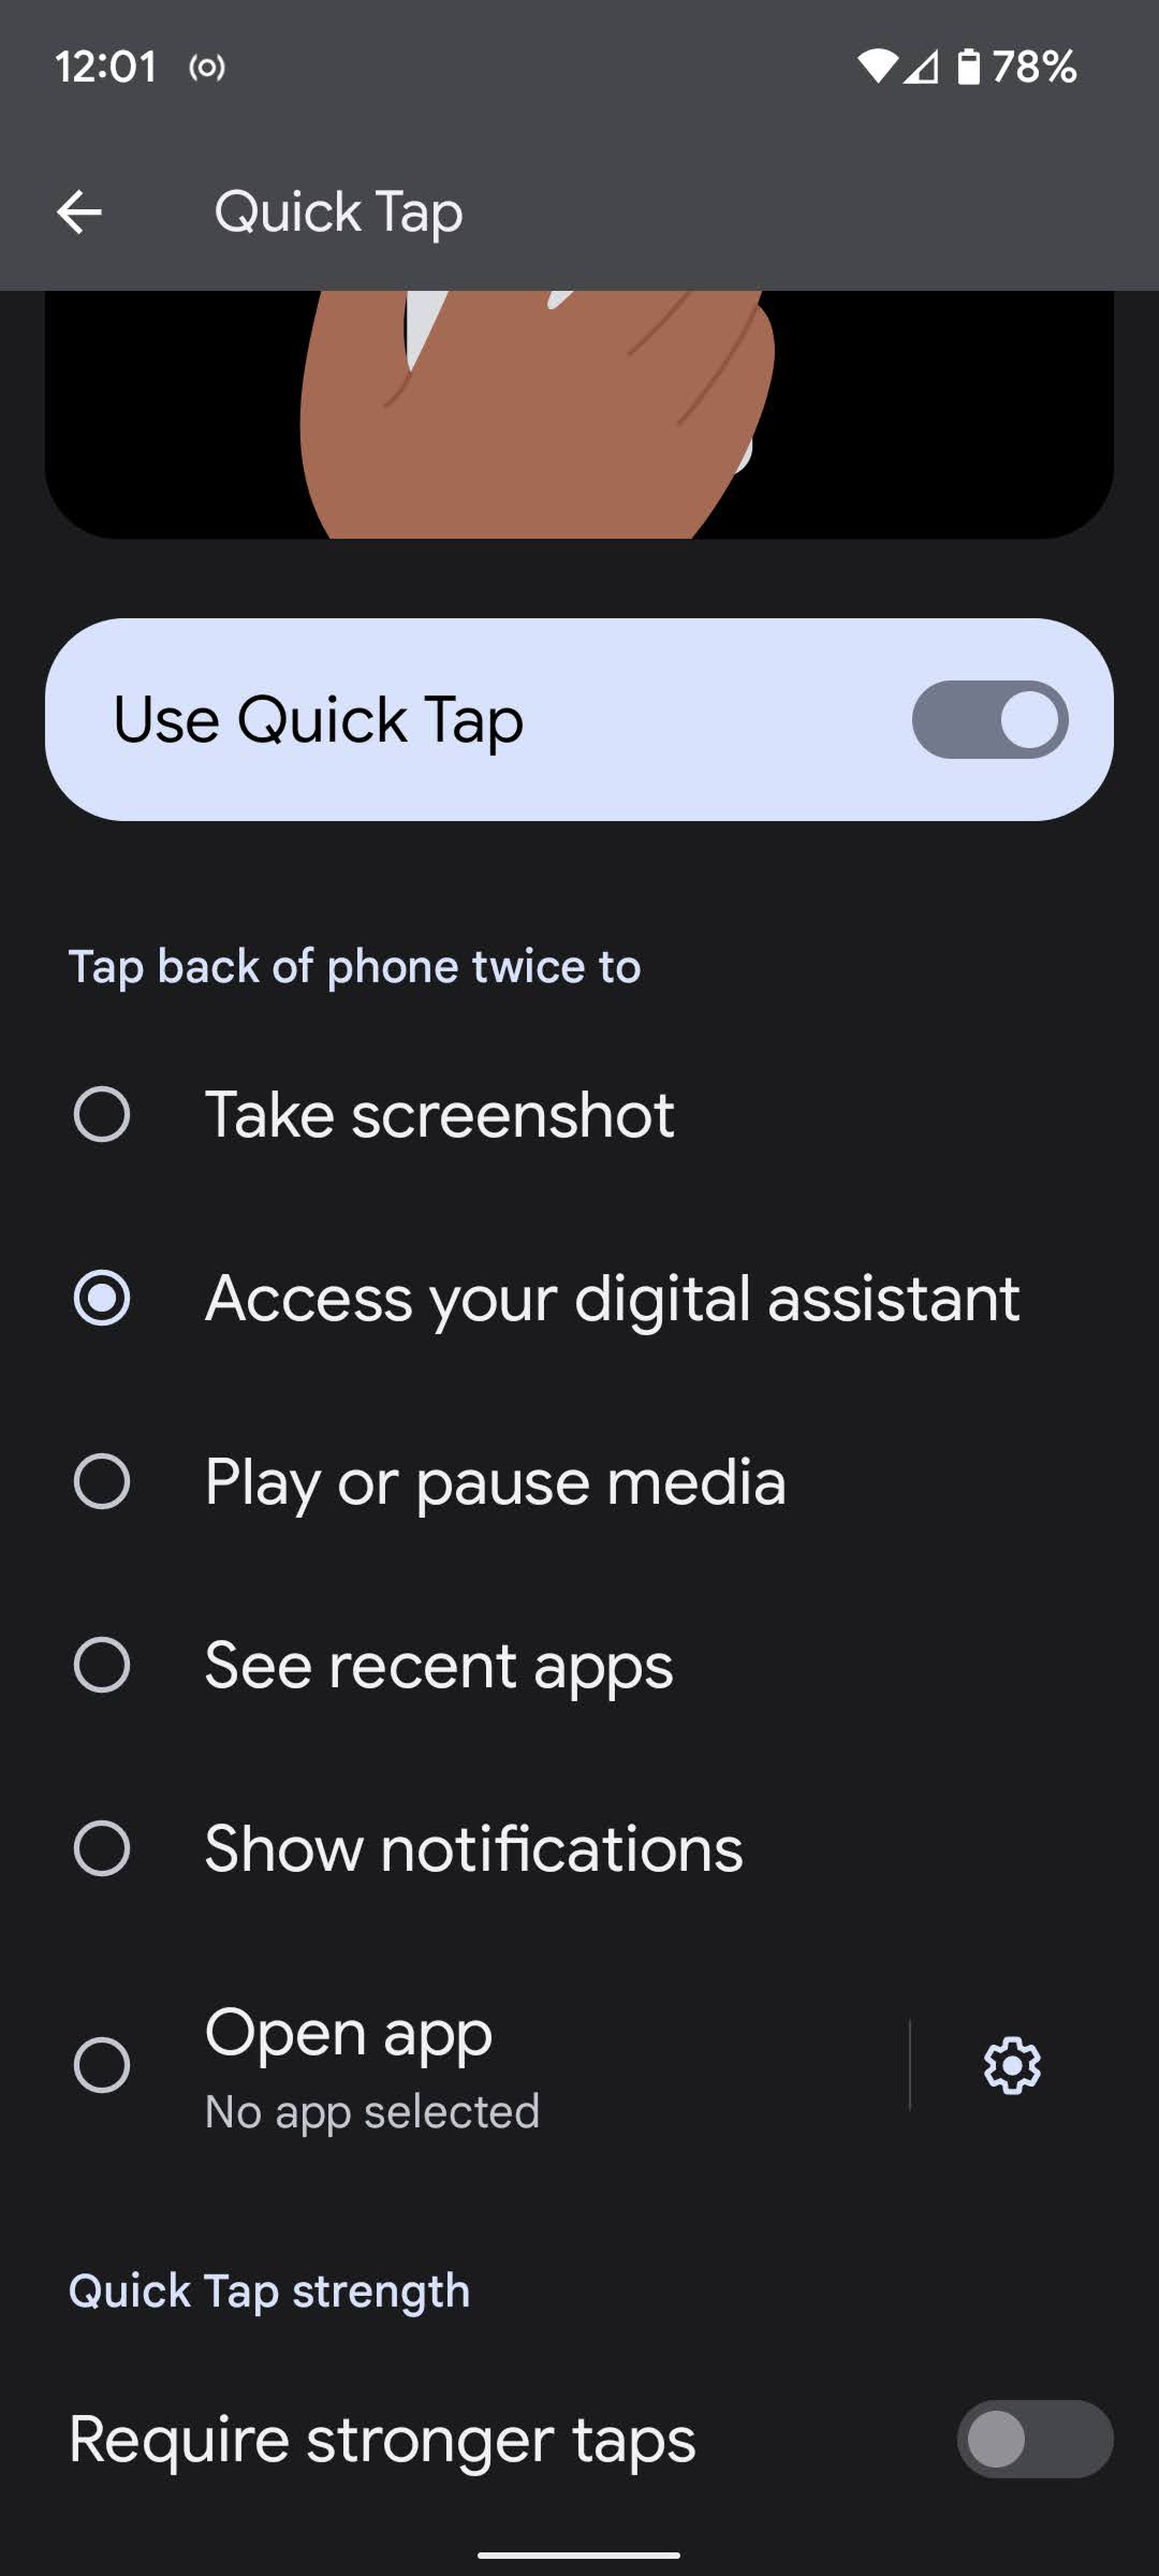 You can use two taps at the back of the phone to enable a number of features.